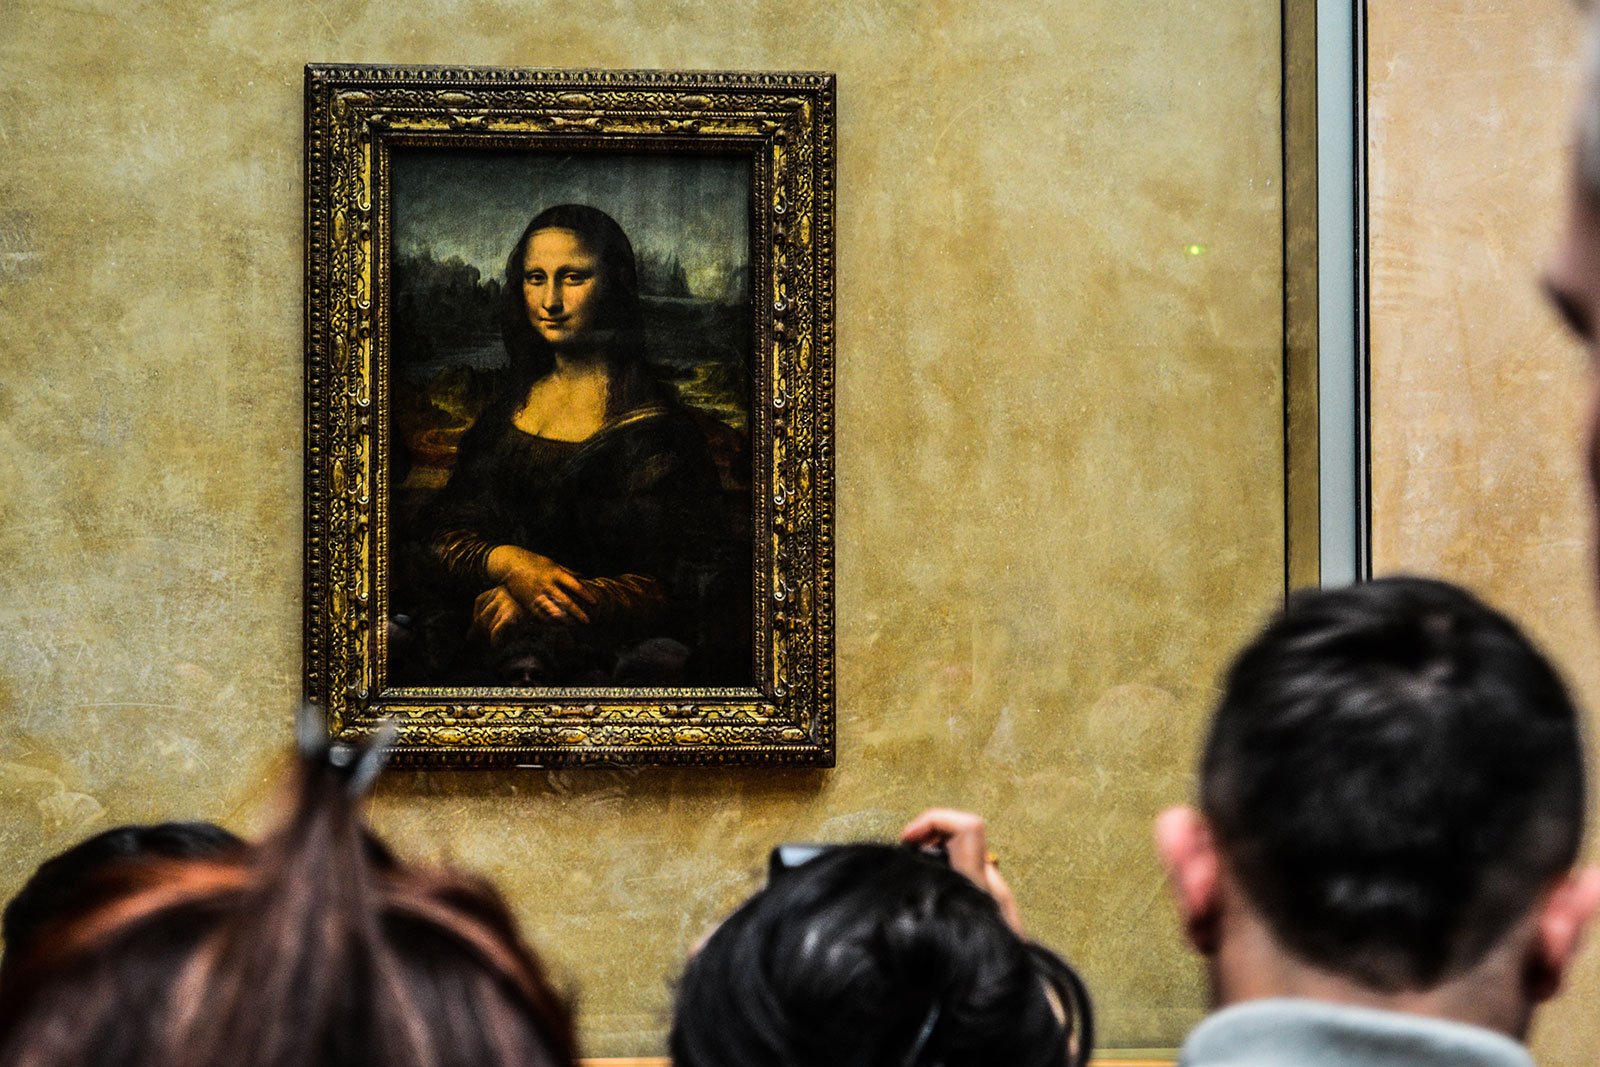 How to see the Mona Lisa in Paris